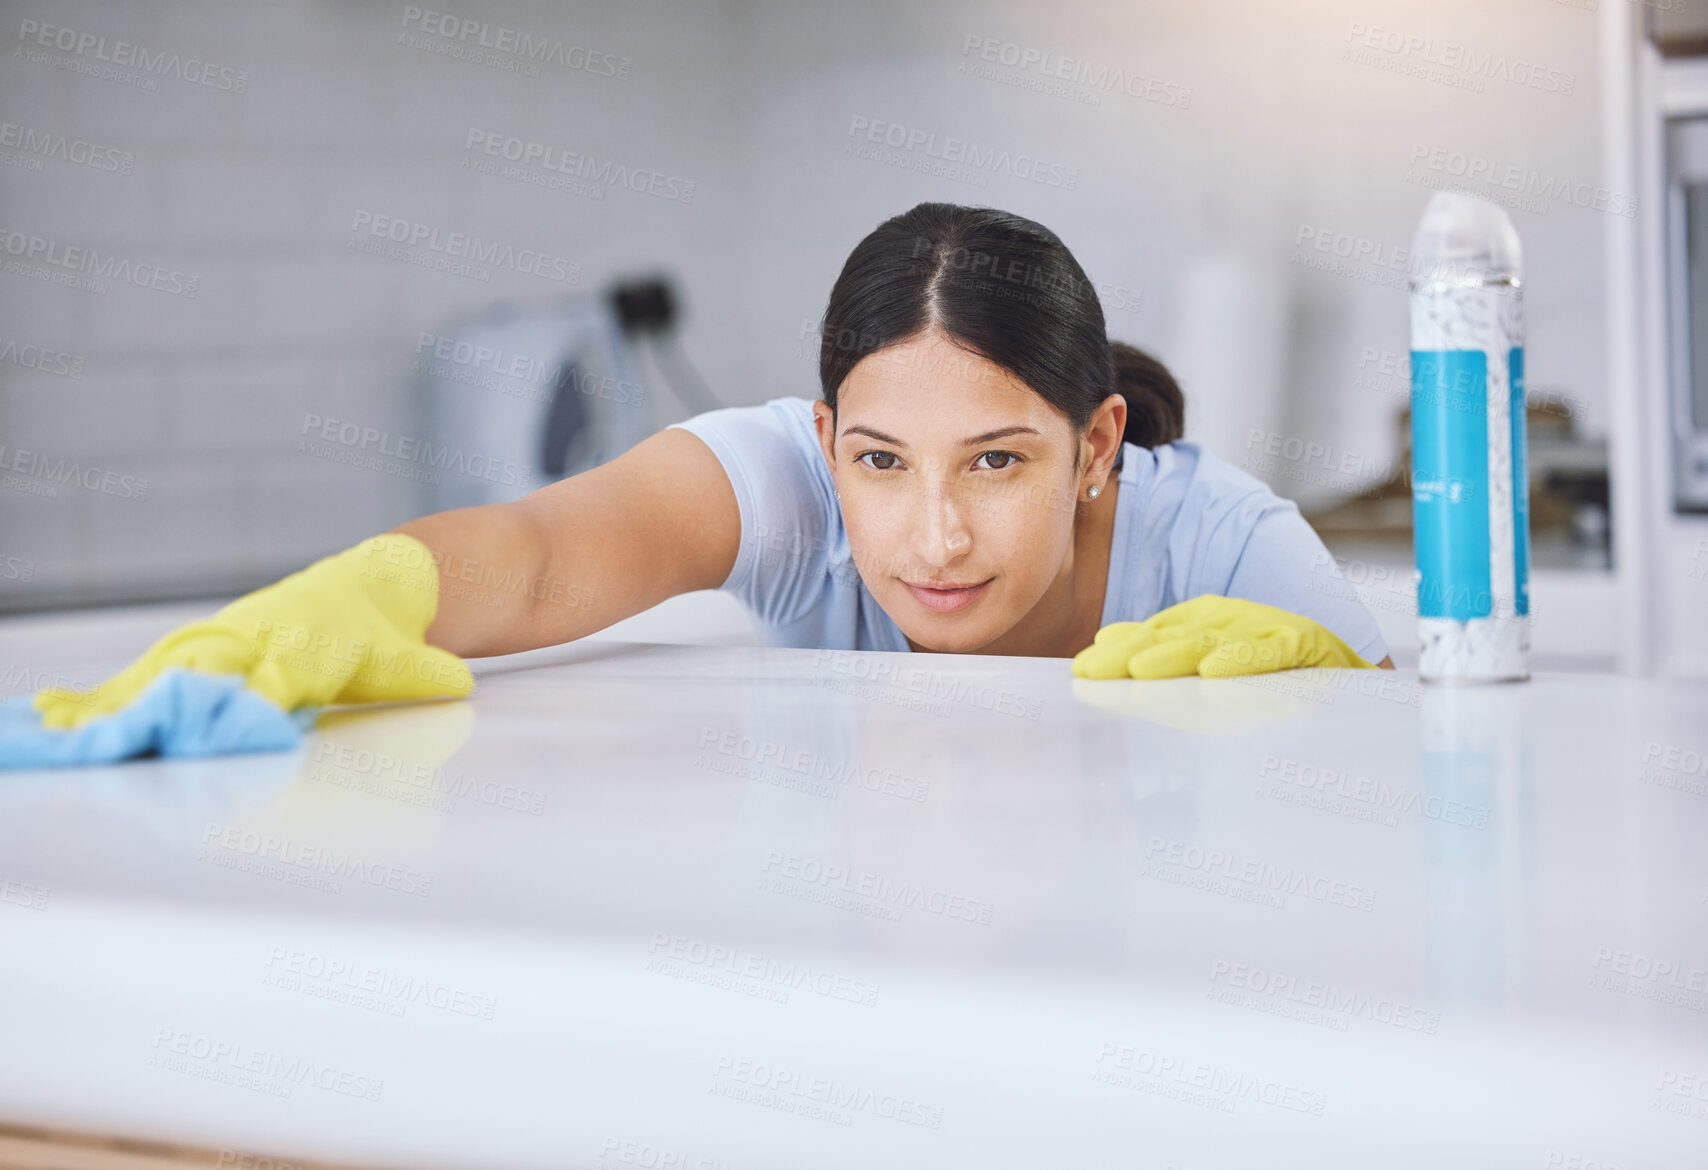 Buy stock photo Shot of a young woman smiling while cleaning a kitchen counter